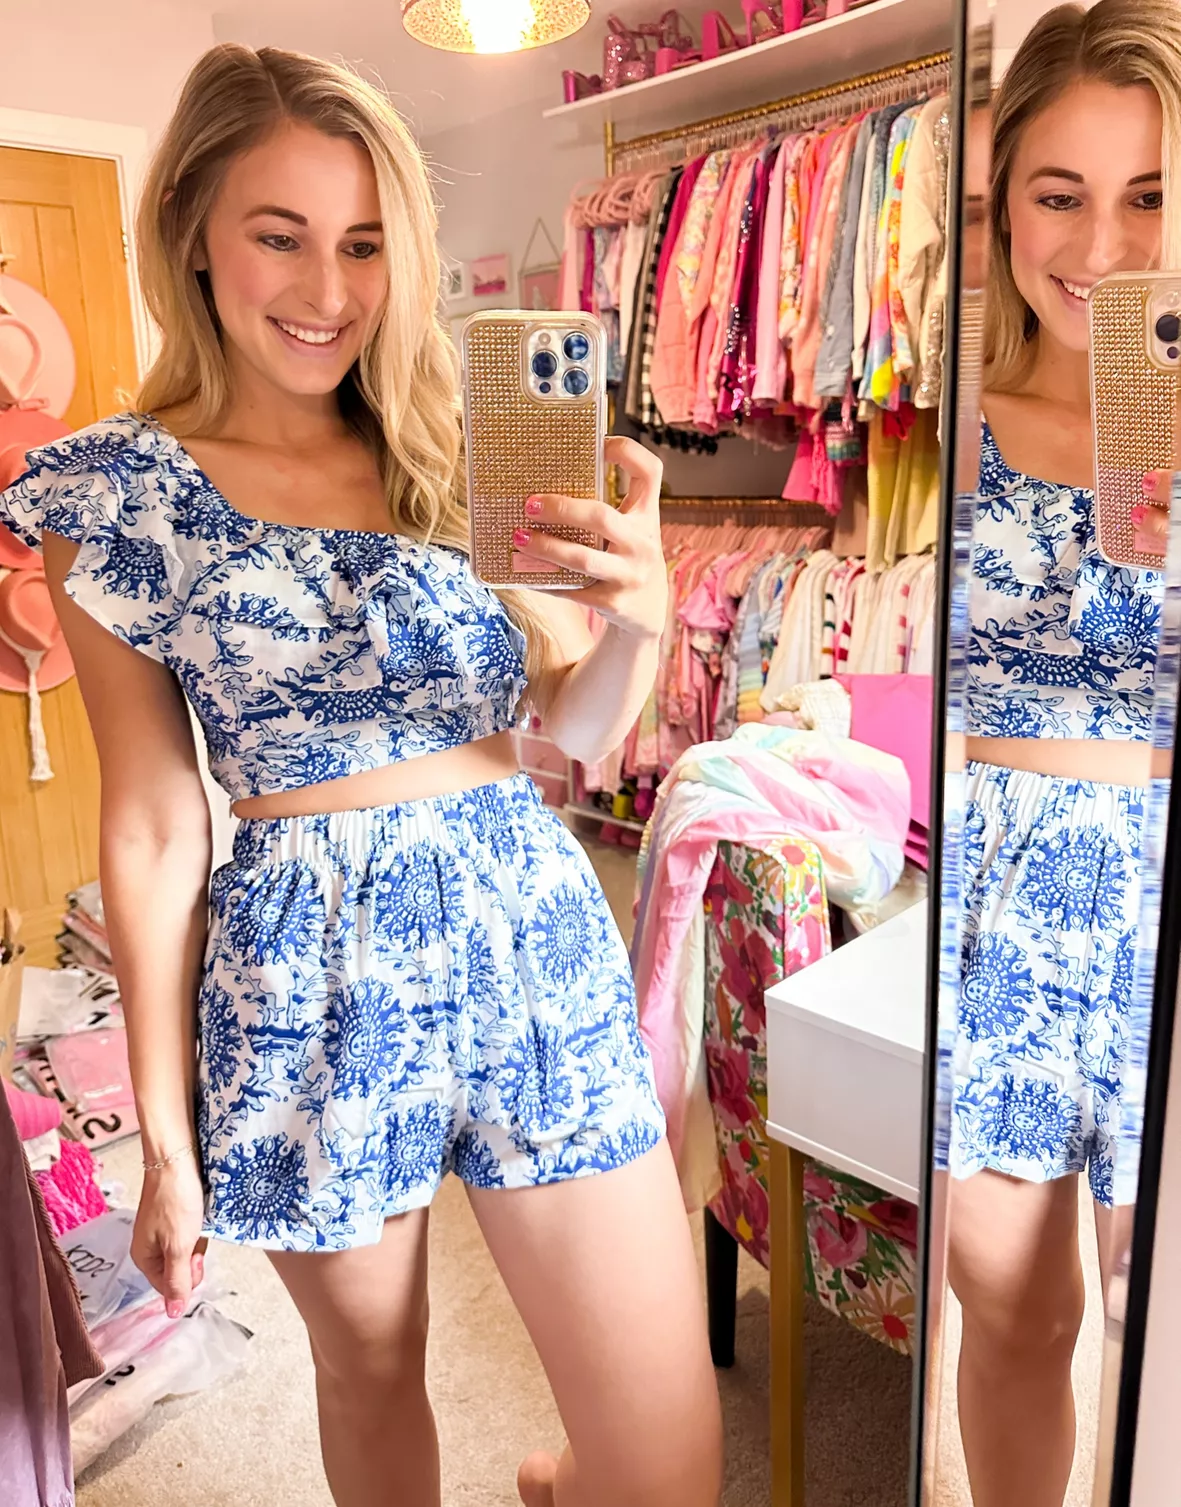 My Top Shein picks! 💗, Gallery posted by LilyGrace